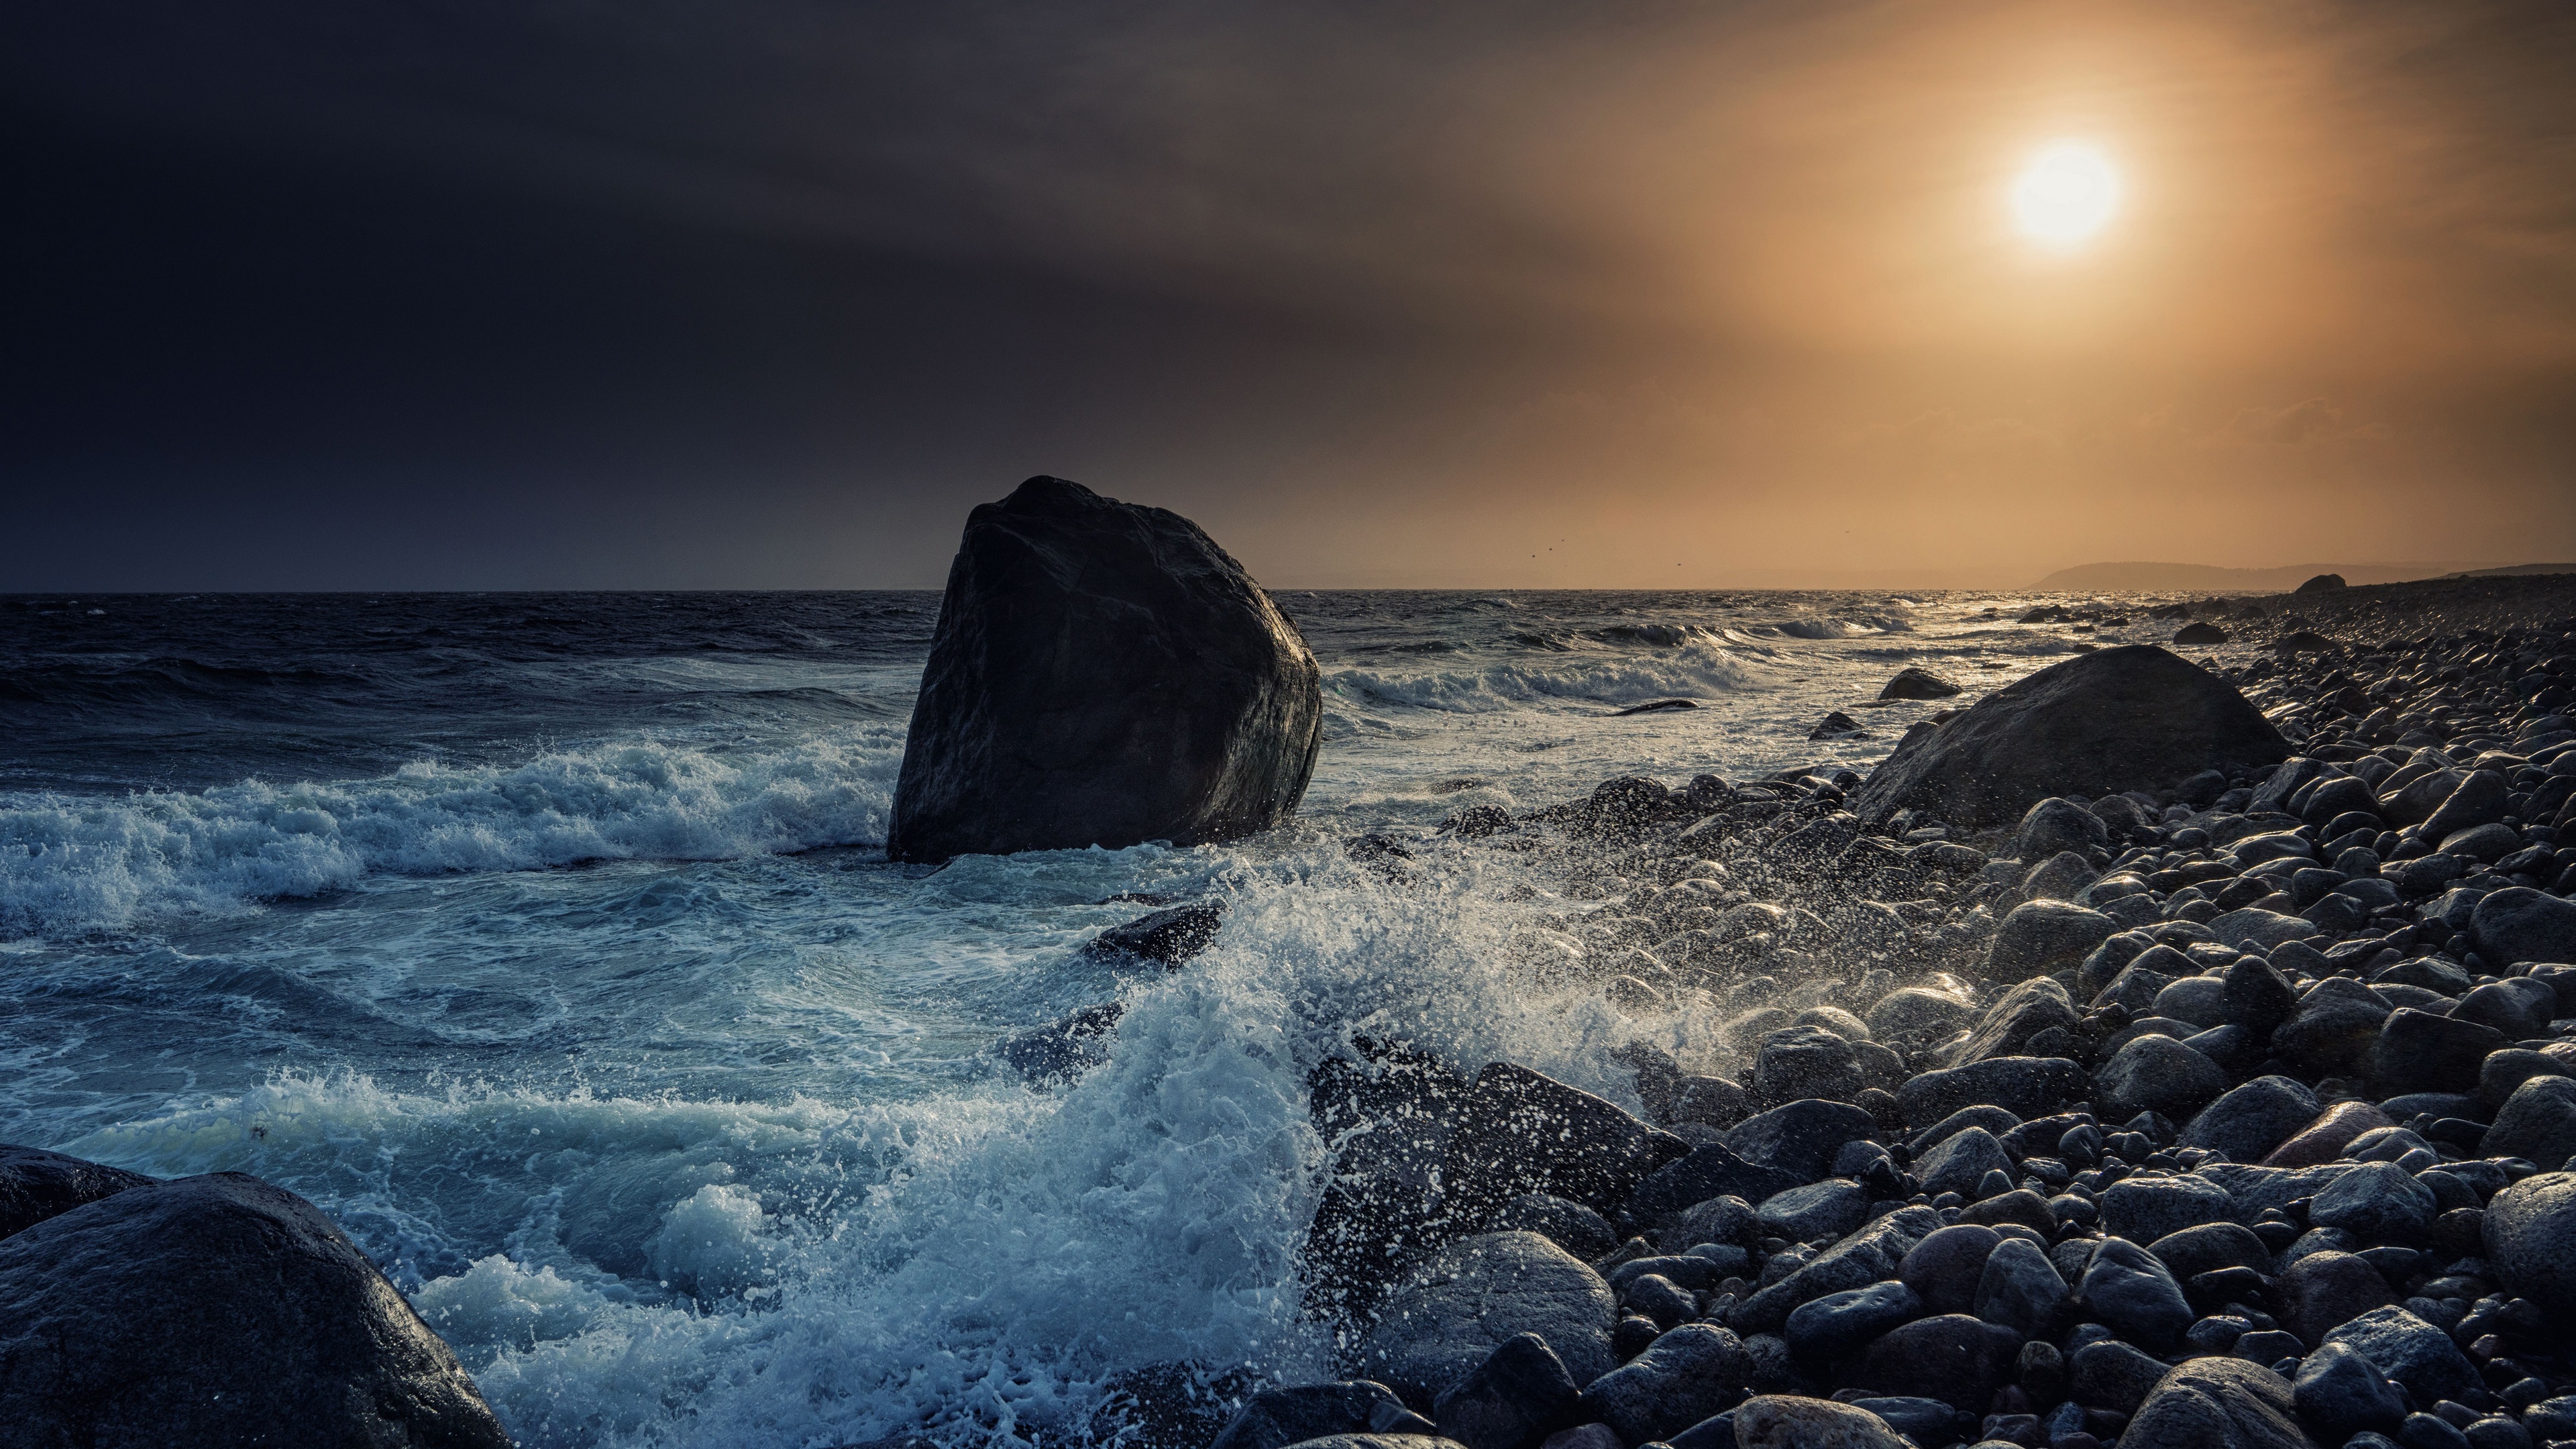 General 3840x2160 Norway nature sea coast waves storm stones rocks sky clouds sunset water low light